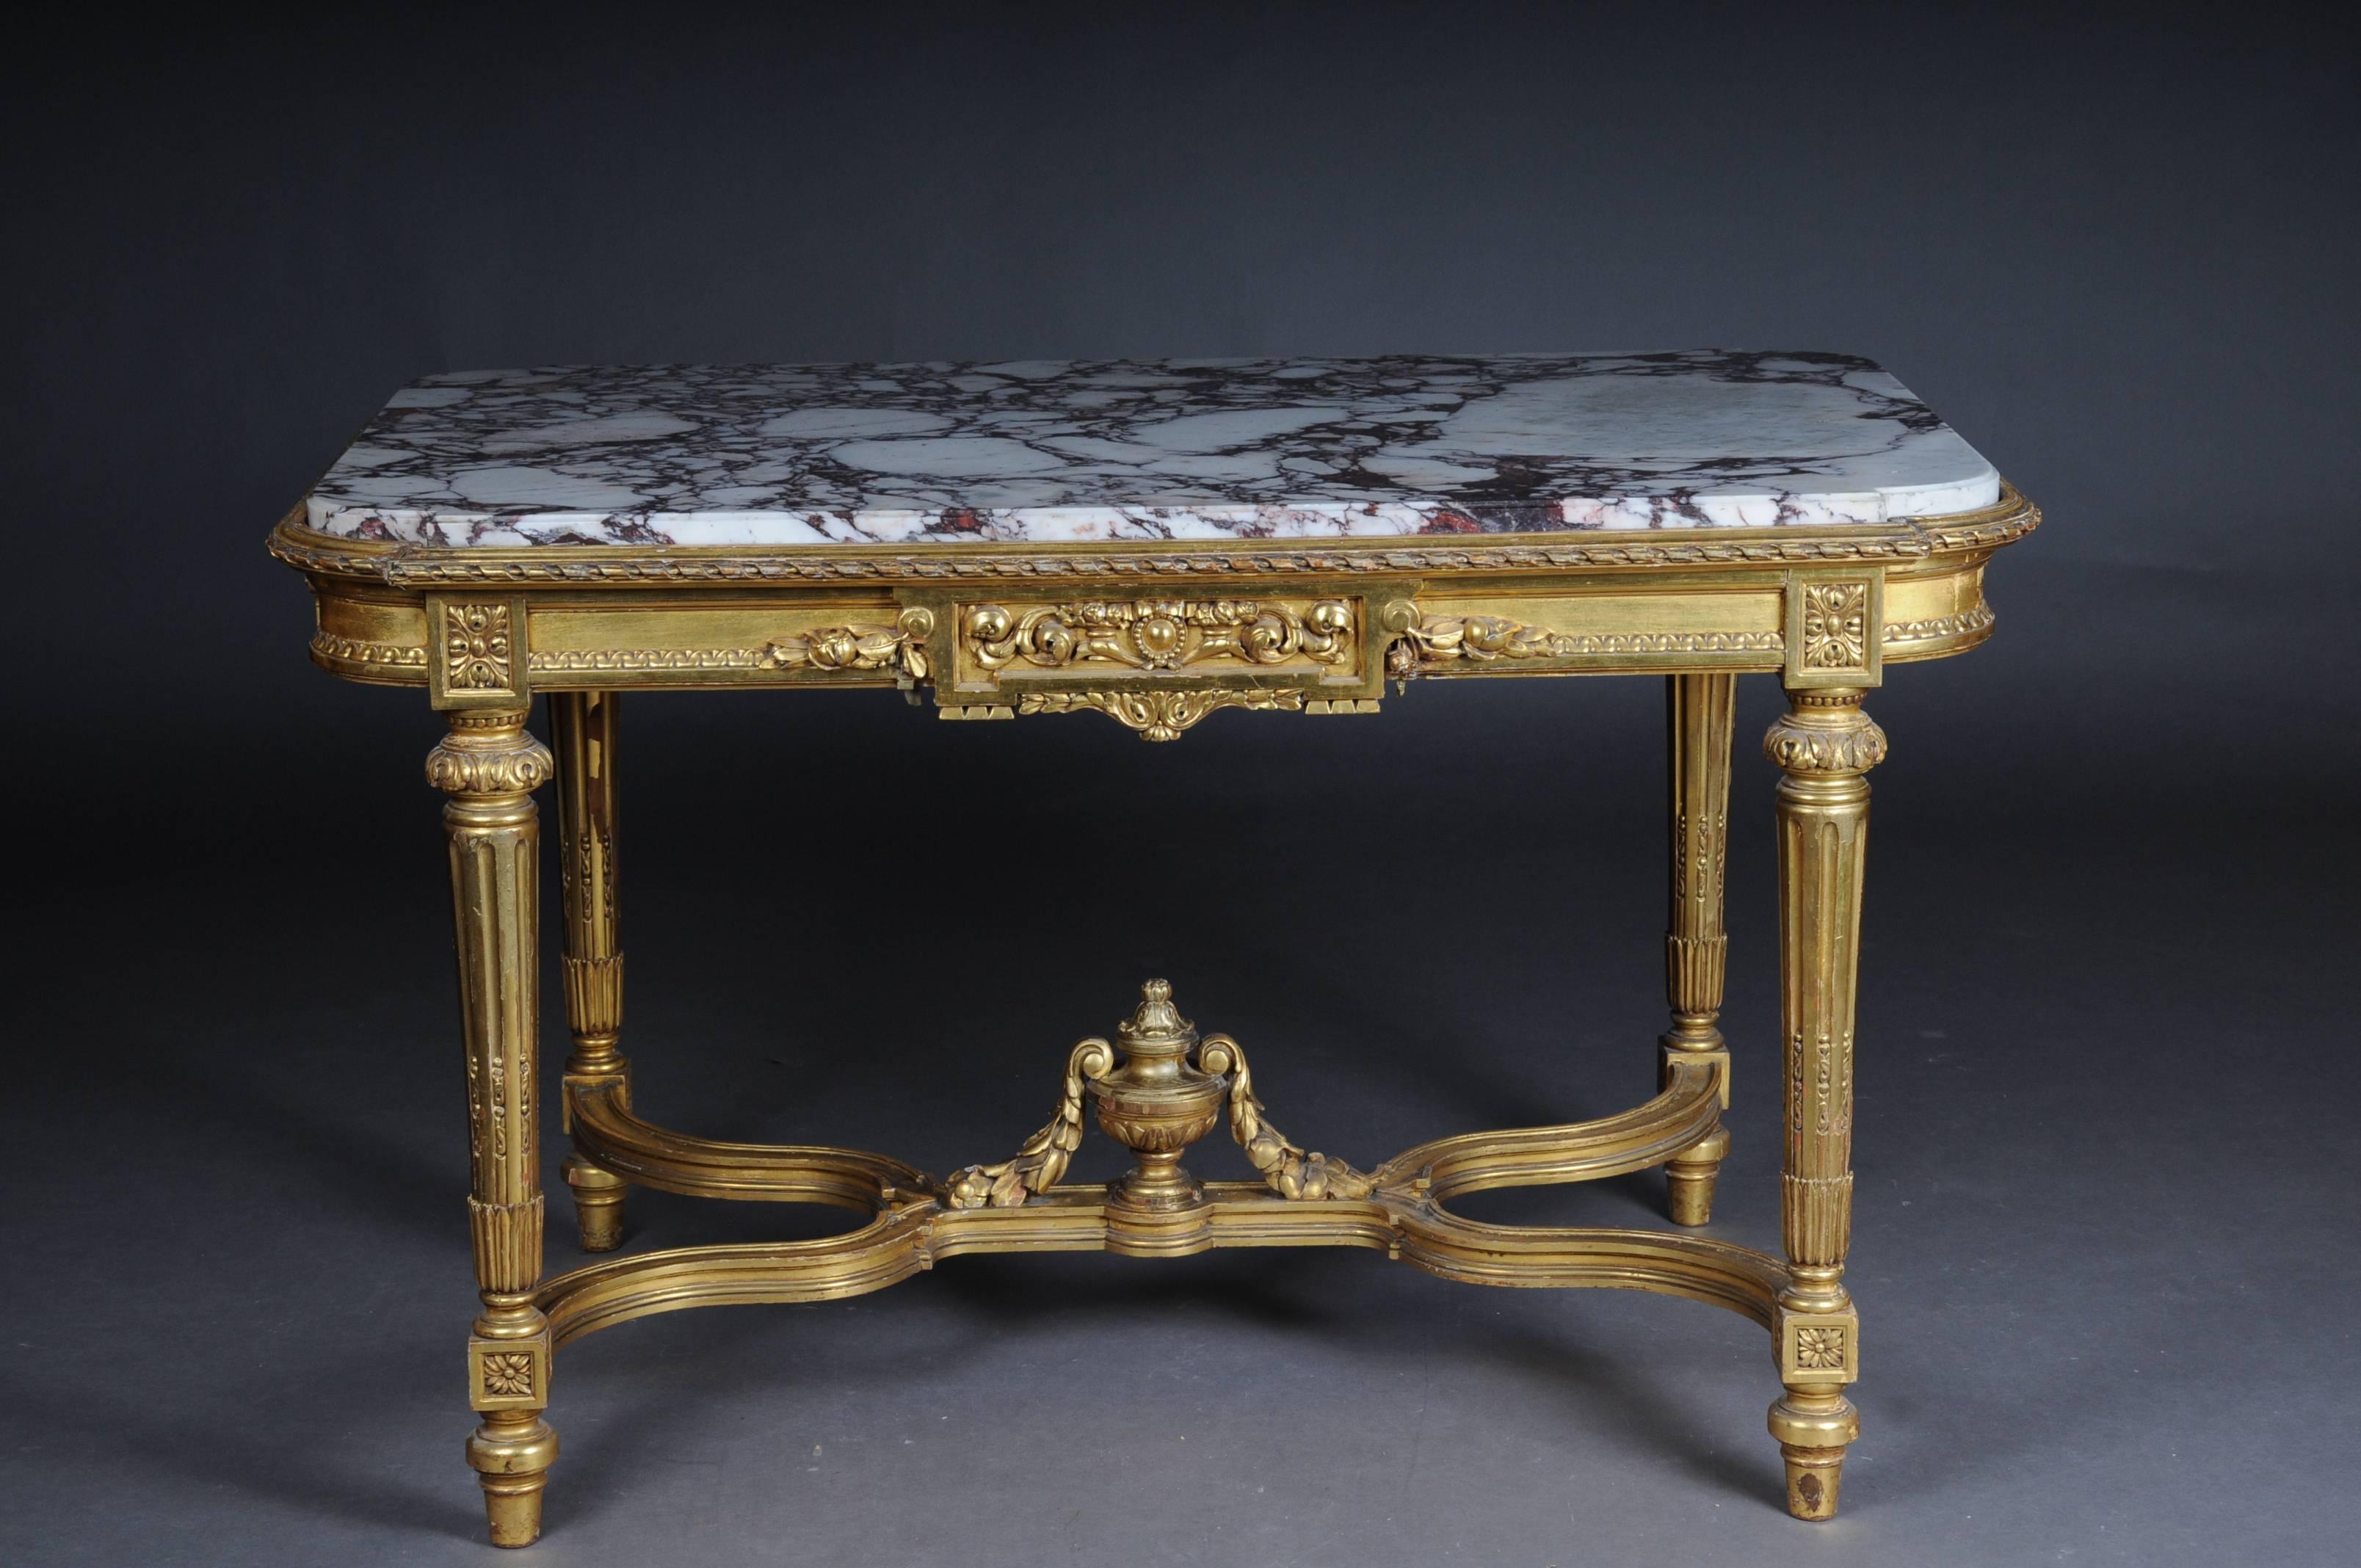 Amazing French Louis XVI Salon Table Gilded, around 1910

Solid wood oak, carved and gold leaf. The table is finely carved down to the last detail. On conical, fluted, carved legs, connected with X-shaped, heavily carved gutter.
On the cover plate